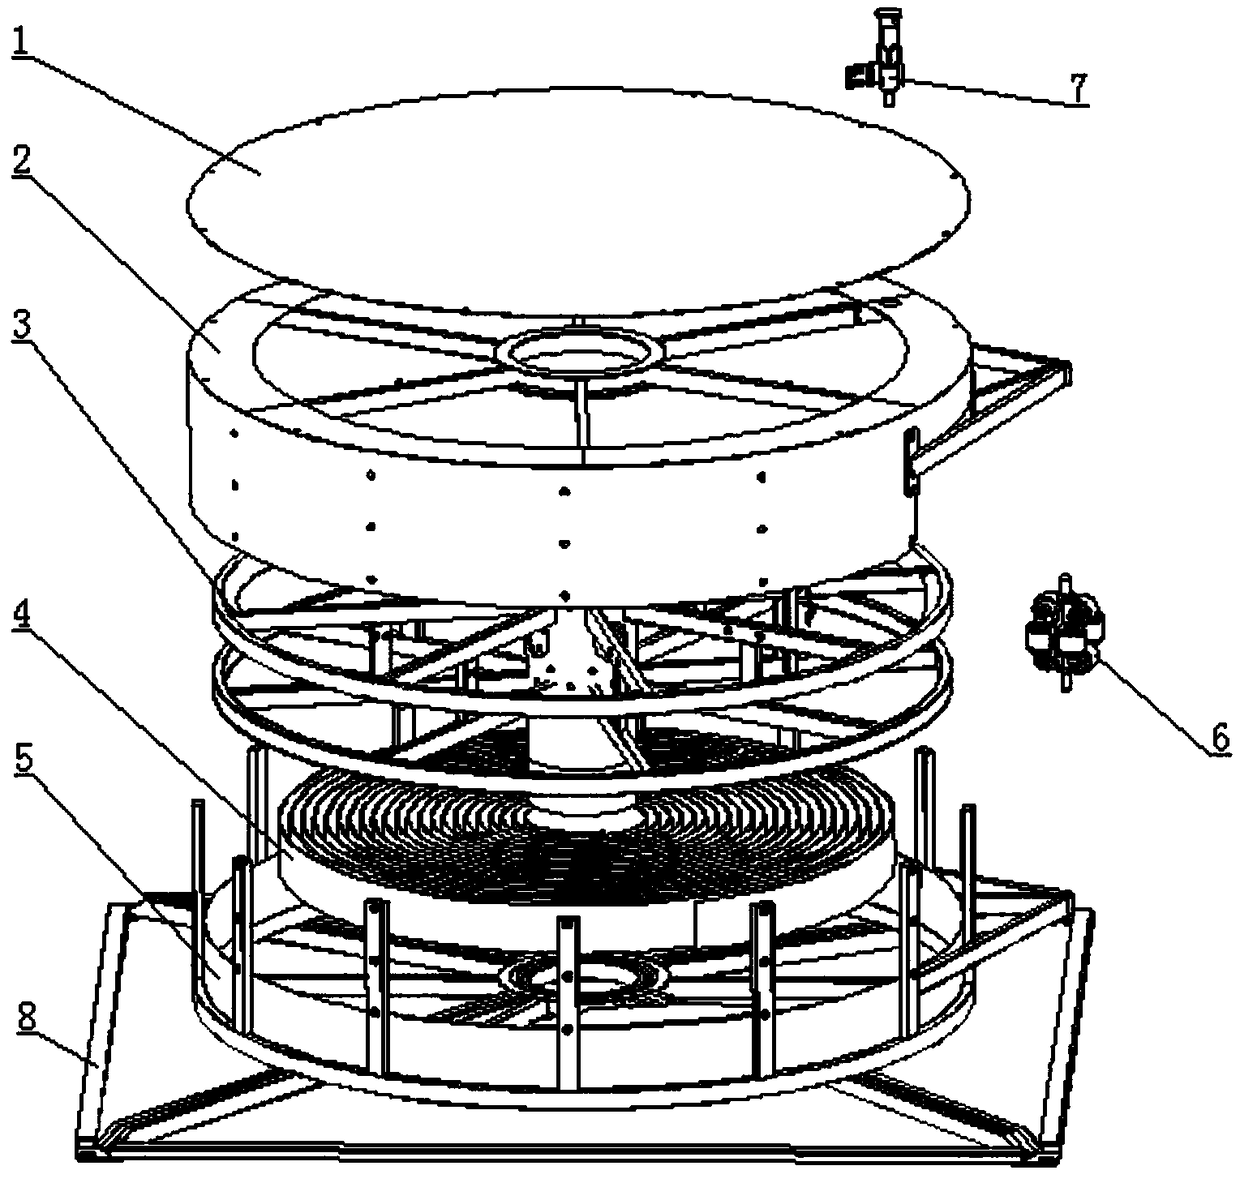 A large-scale take-up reel for engineering